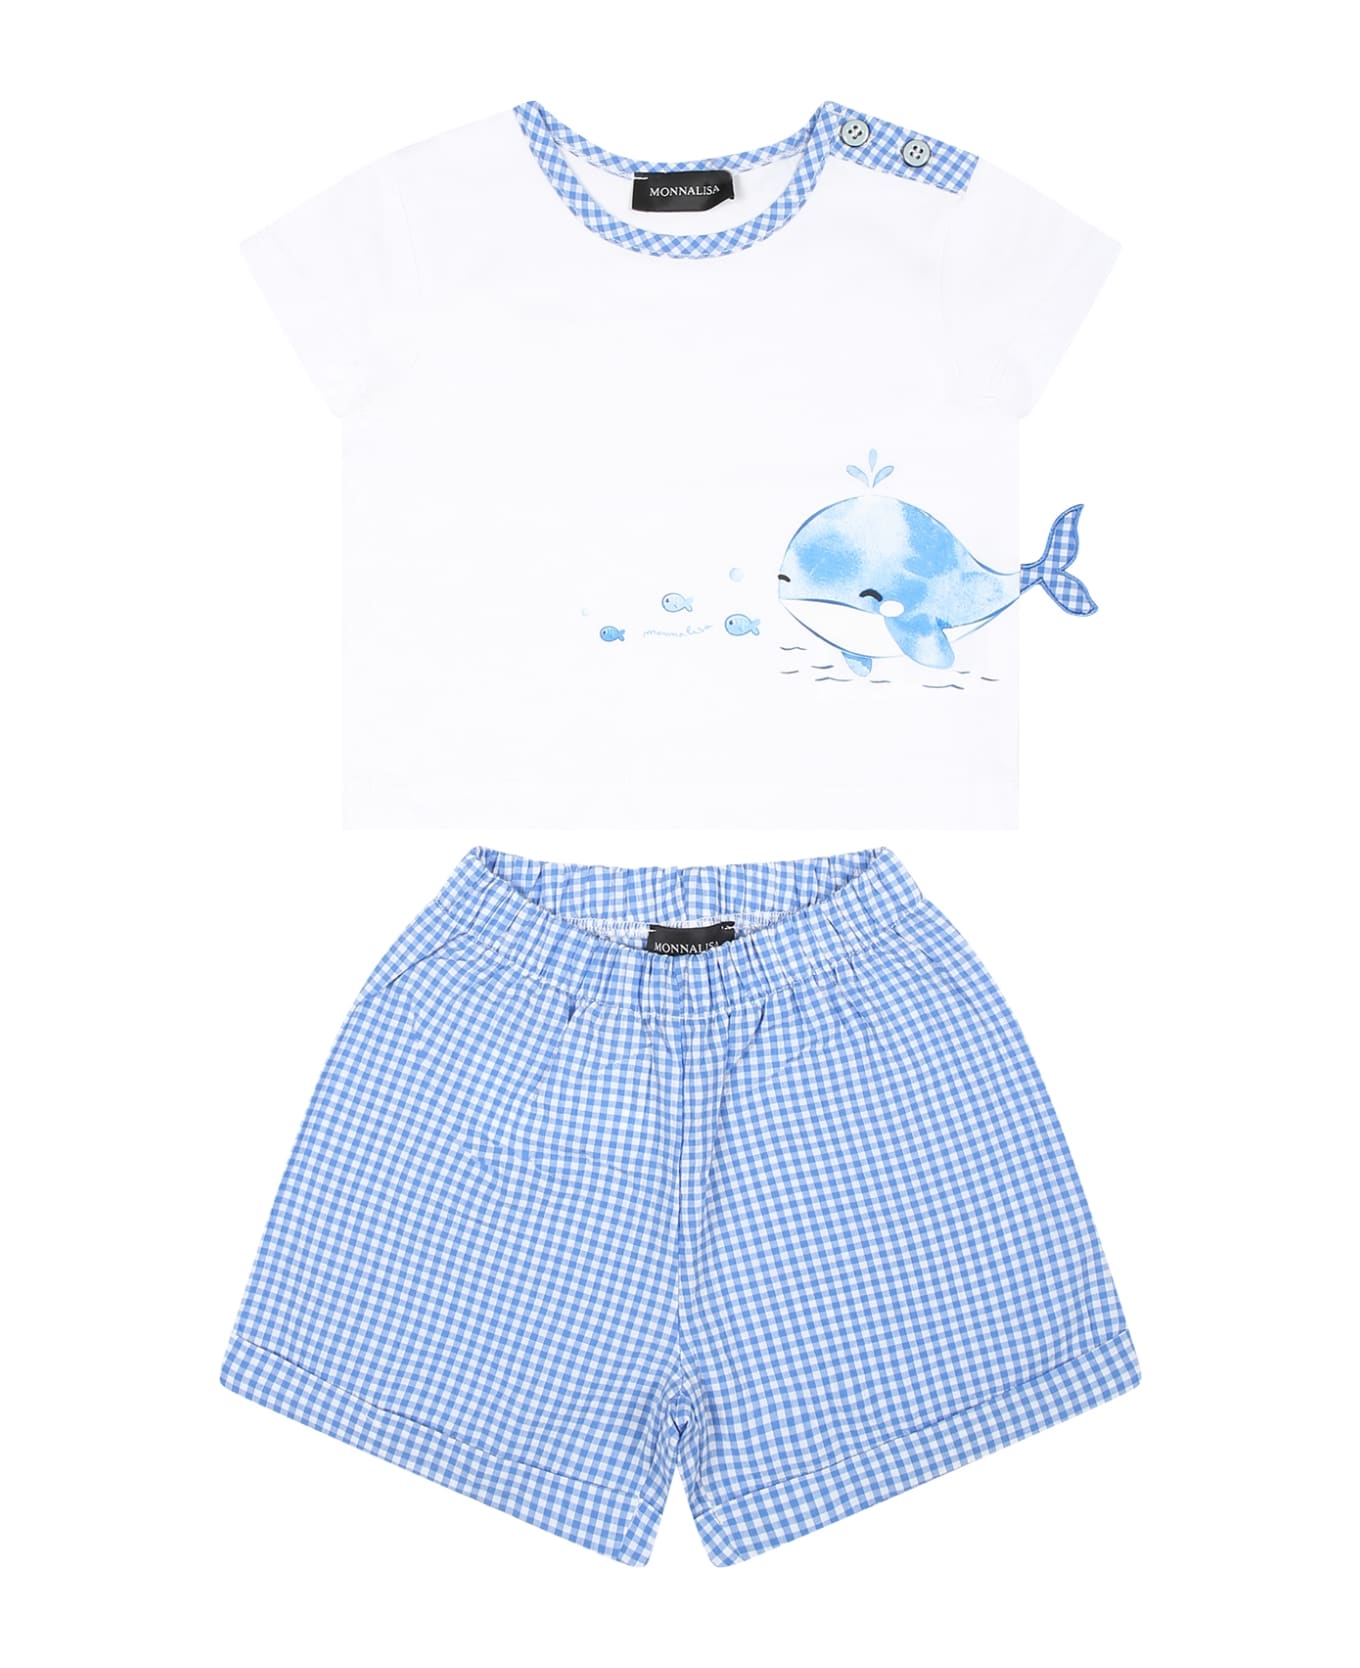 Monnalisa White Suit For Baby Boy With Whale Print - White ボトムス